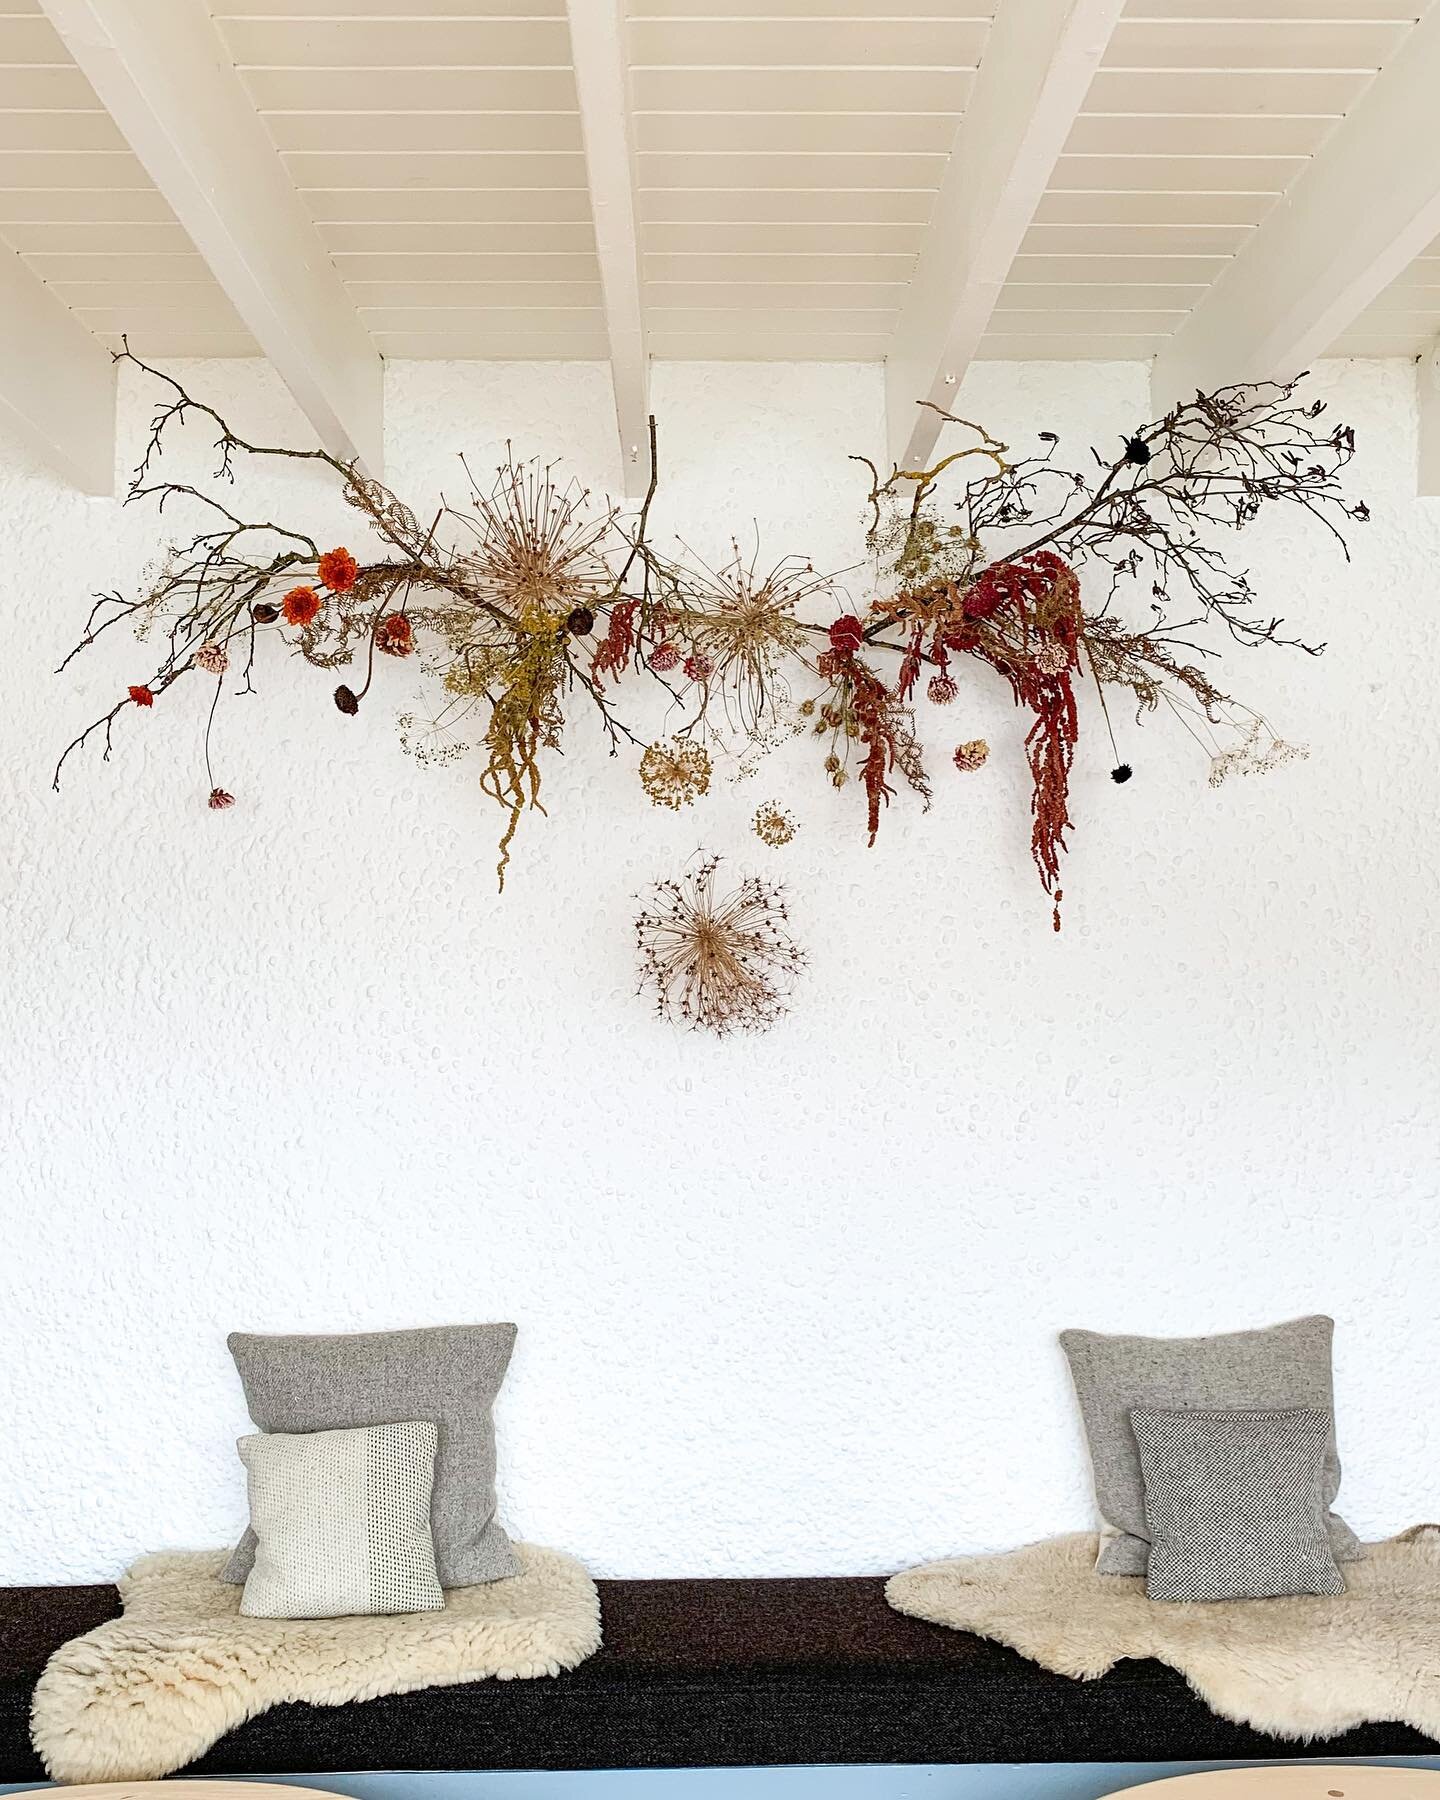 Hanging installation for Inver 💚
Located on a secluded shore of Loch Fyne, Argyll, @inverrestaurant is a very special place and it&rsquo;s been a completely wonderful experience to create installations for their unique restaurant space. This hanging